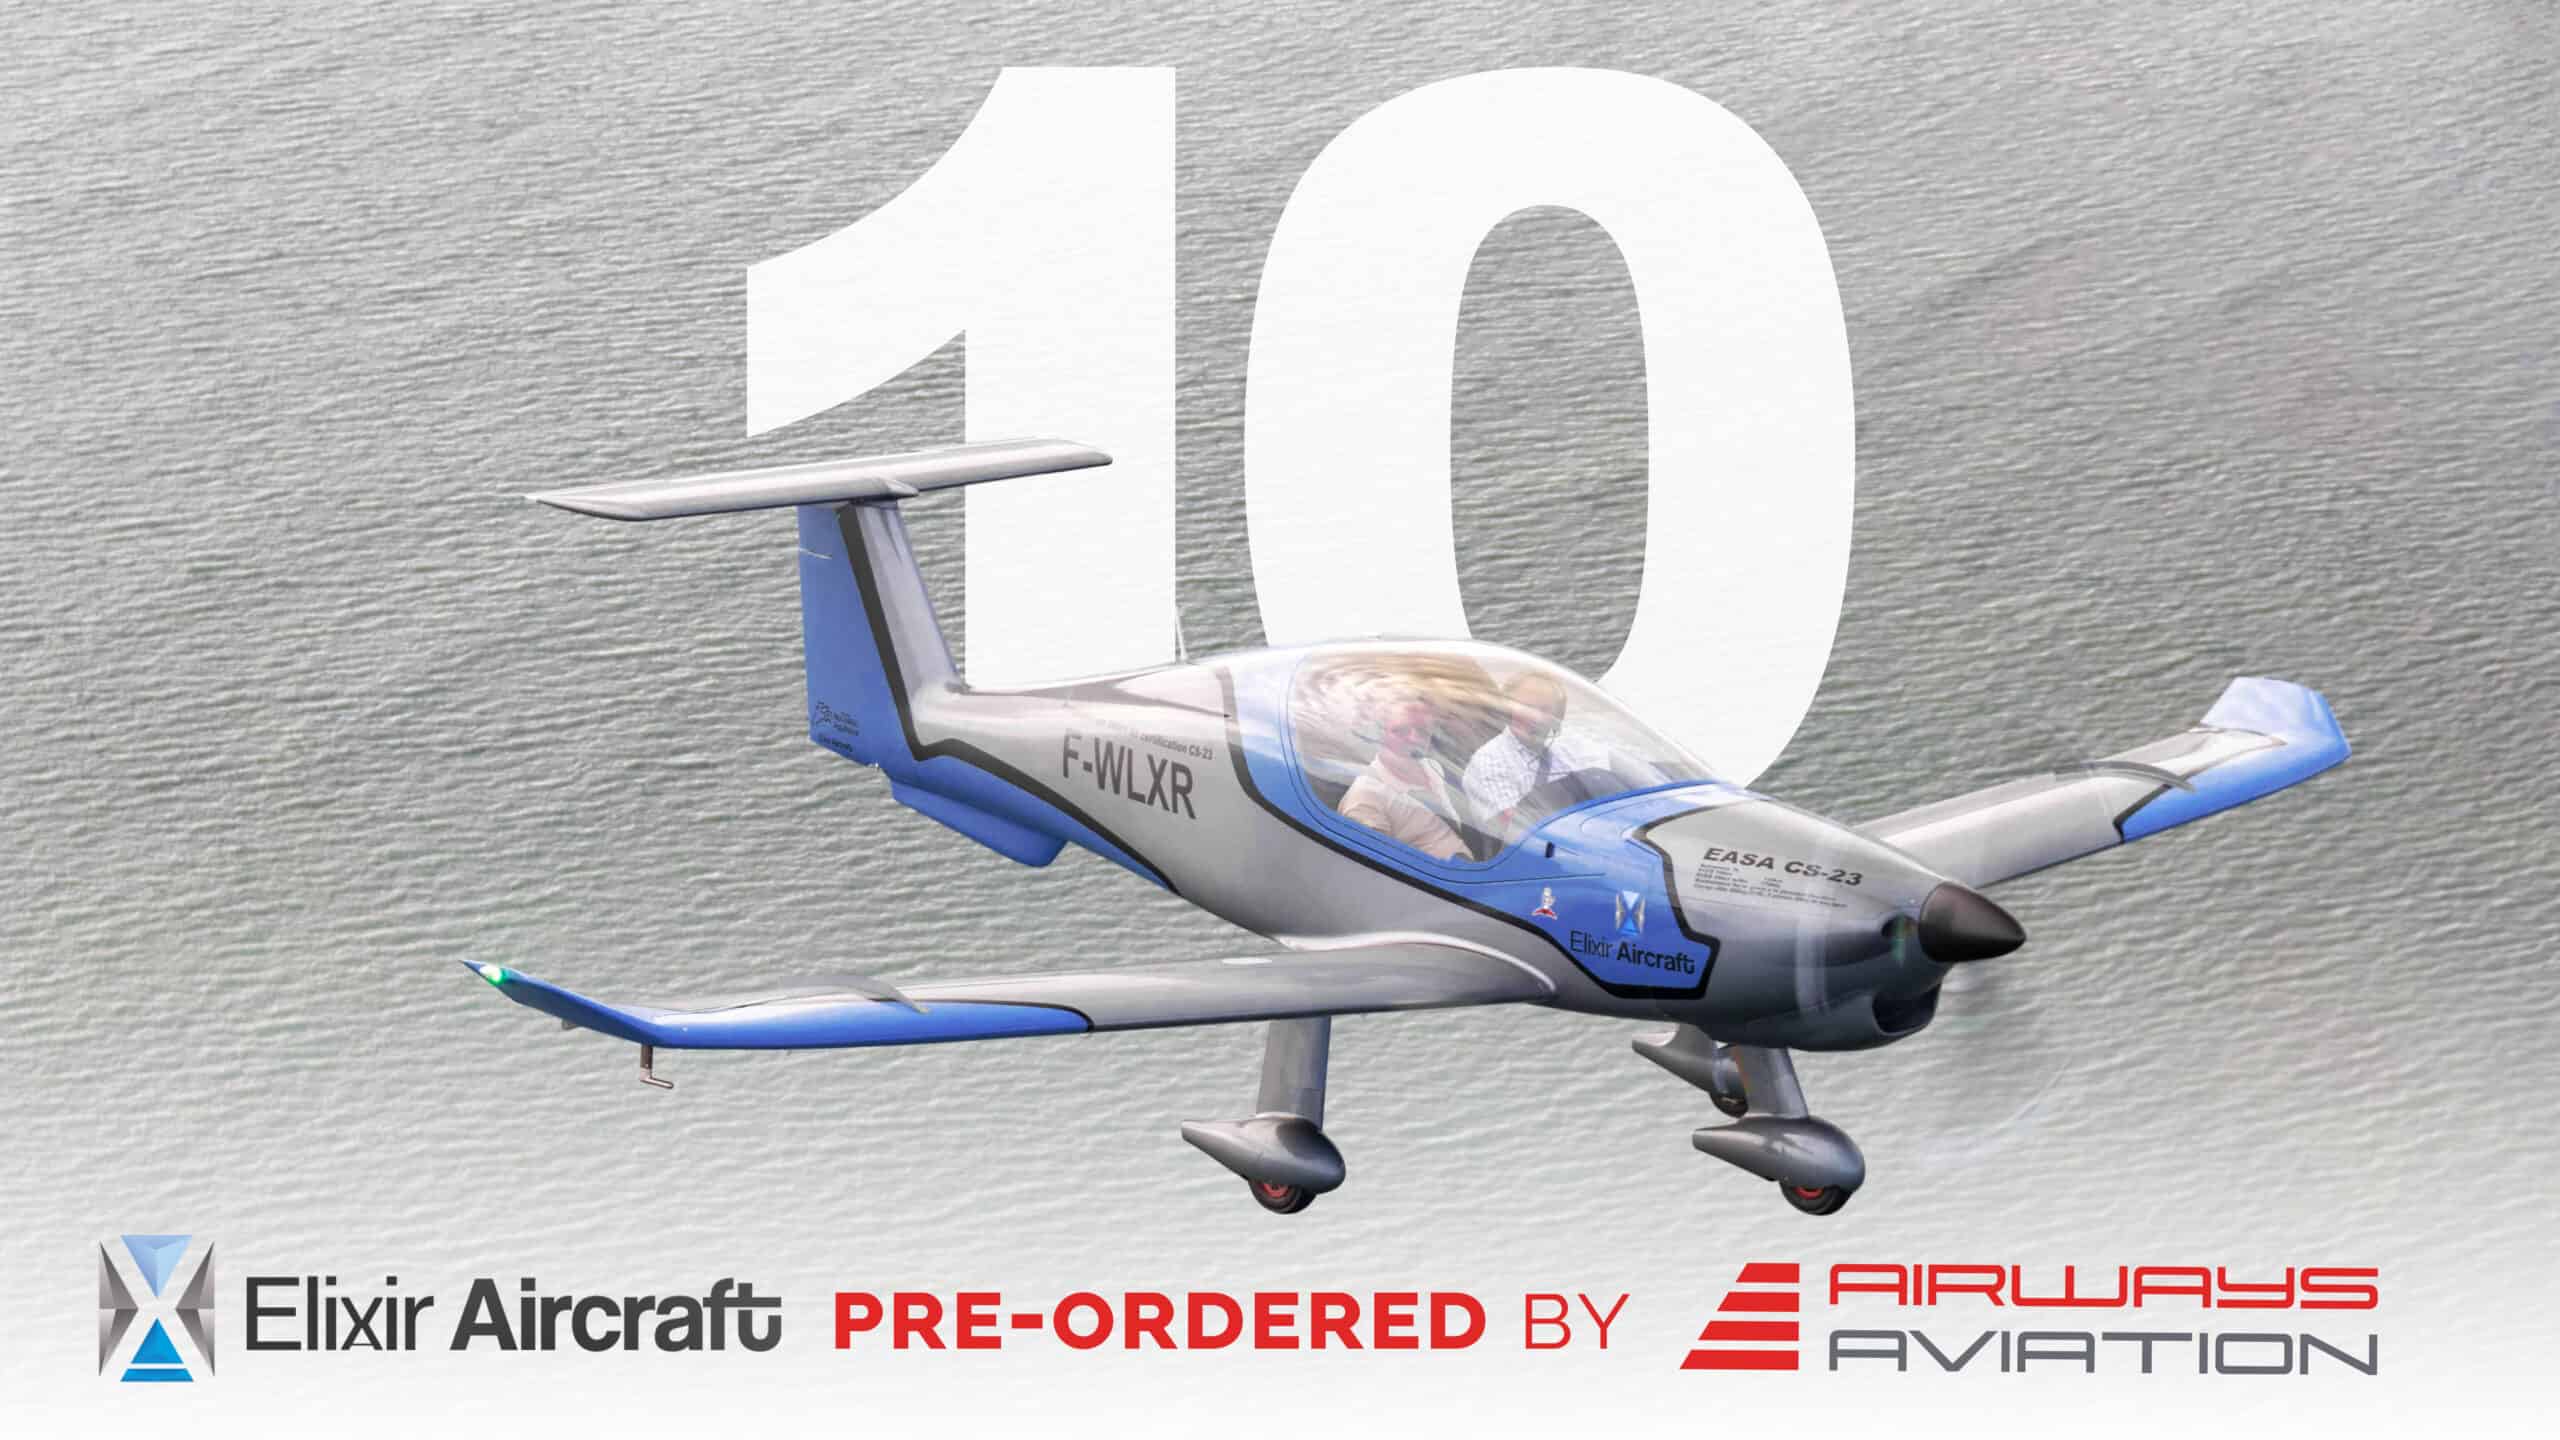 10 Elixir Aircraft training aircrafts have been preordered by Airways Aviation